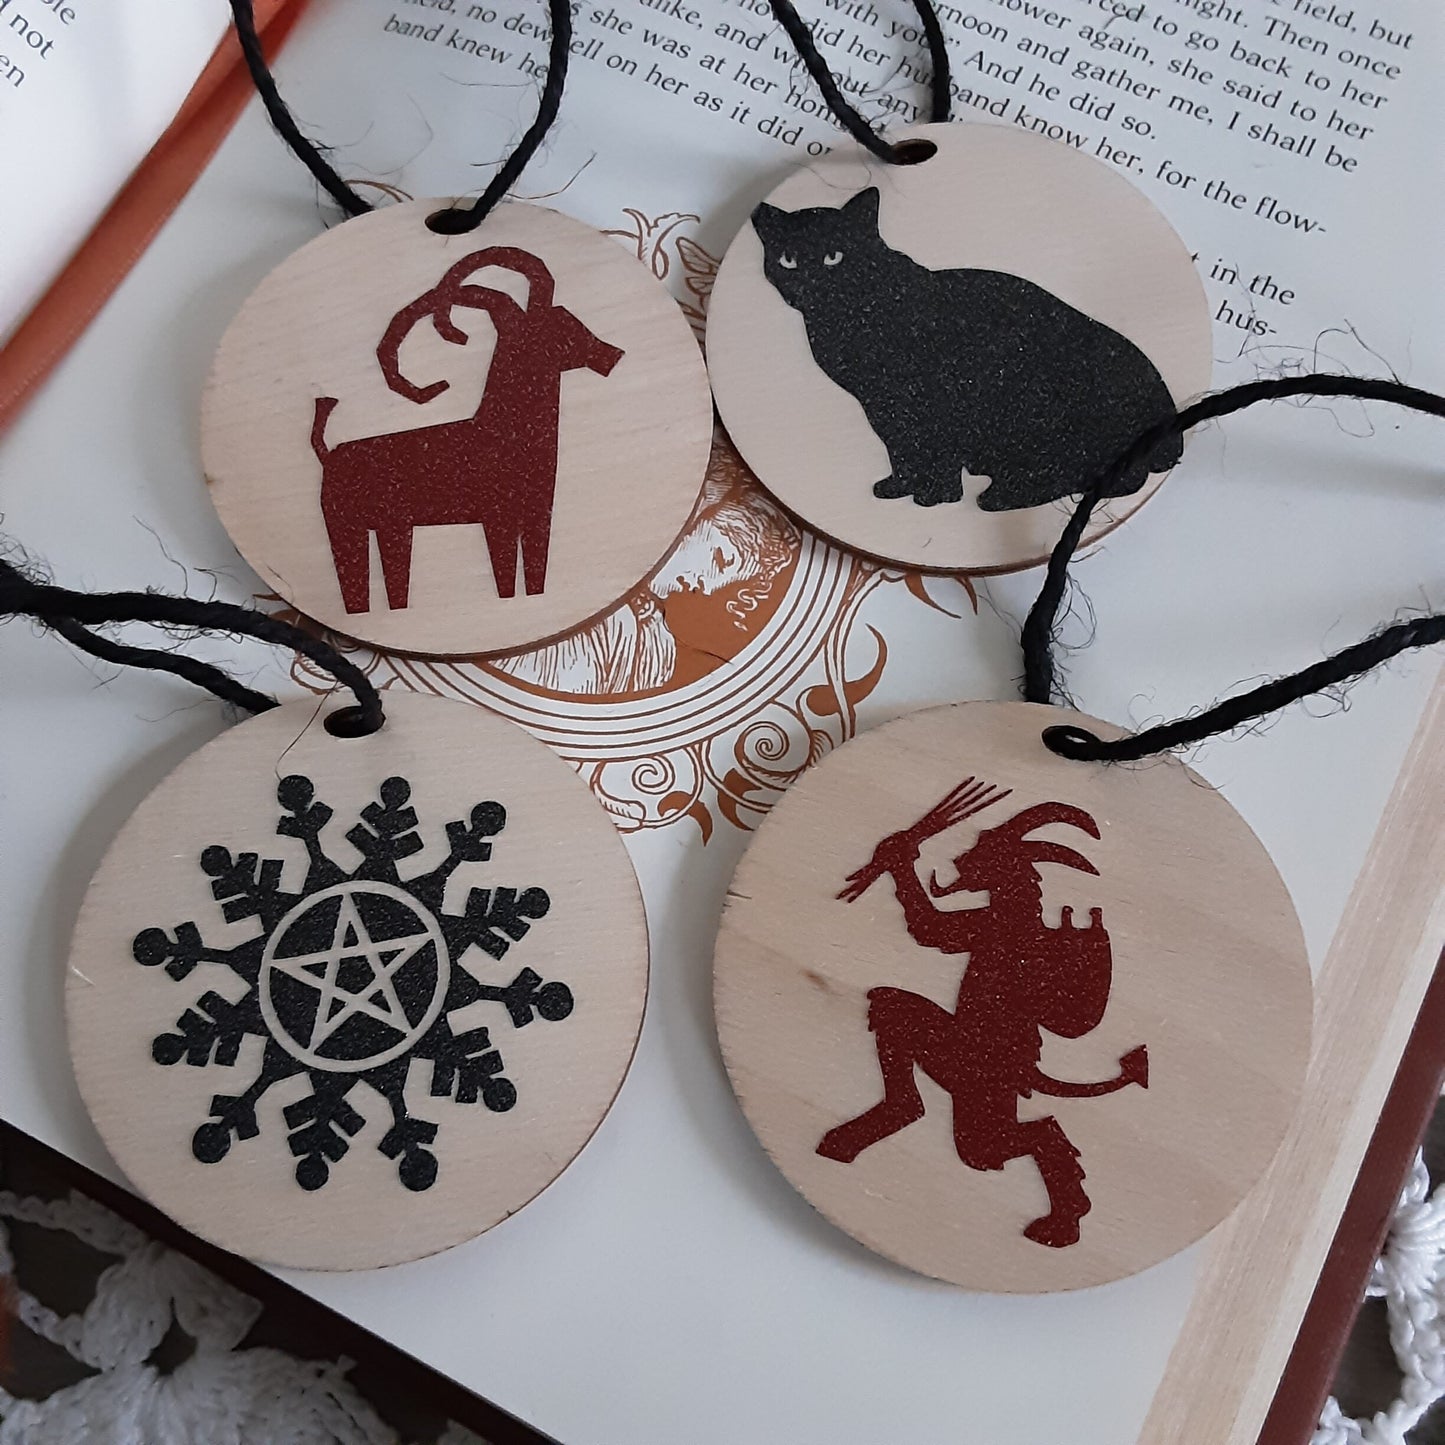 Yule glitter ornament 1 pc wooden decor, Pentacle snowflake, Yule Goat, Yule Cat and Krampus Pagan Holiday decor, Witchy Gothic vibes